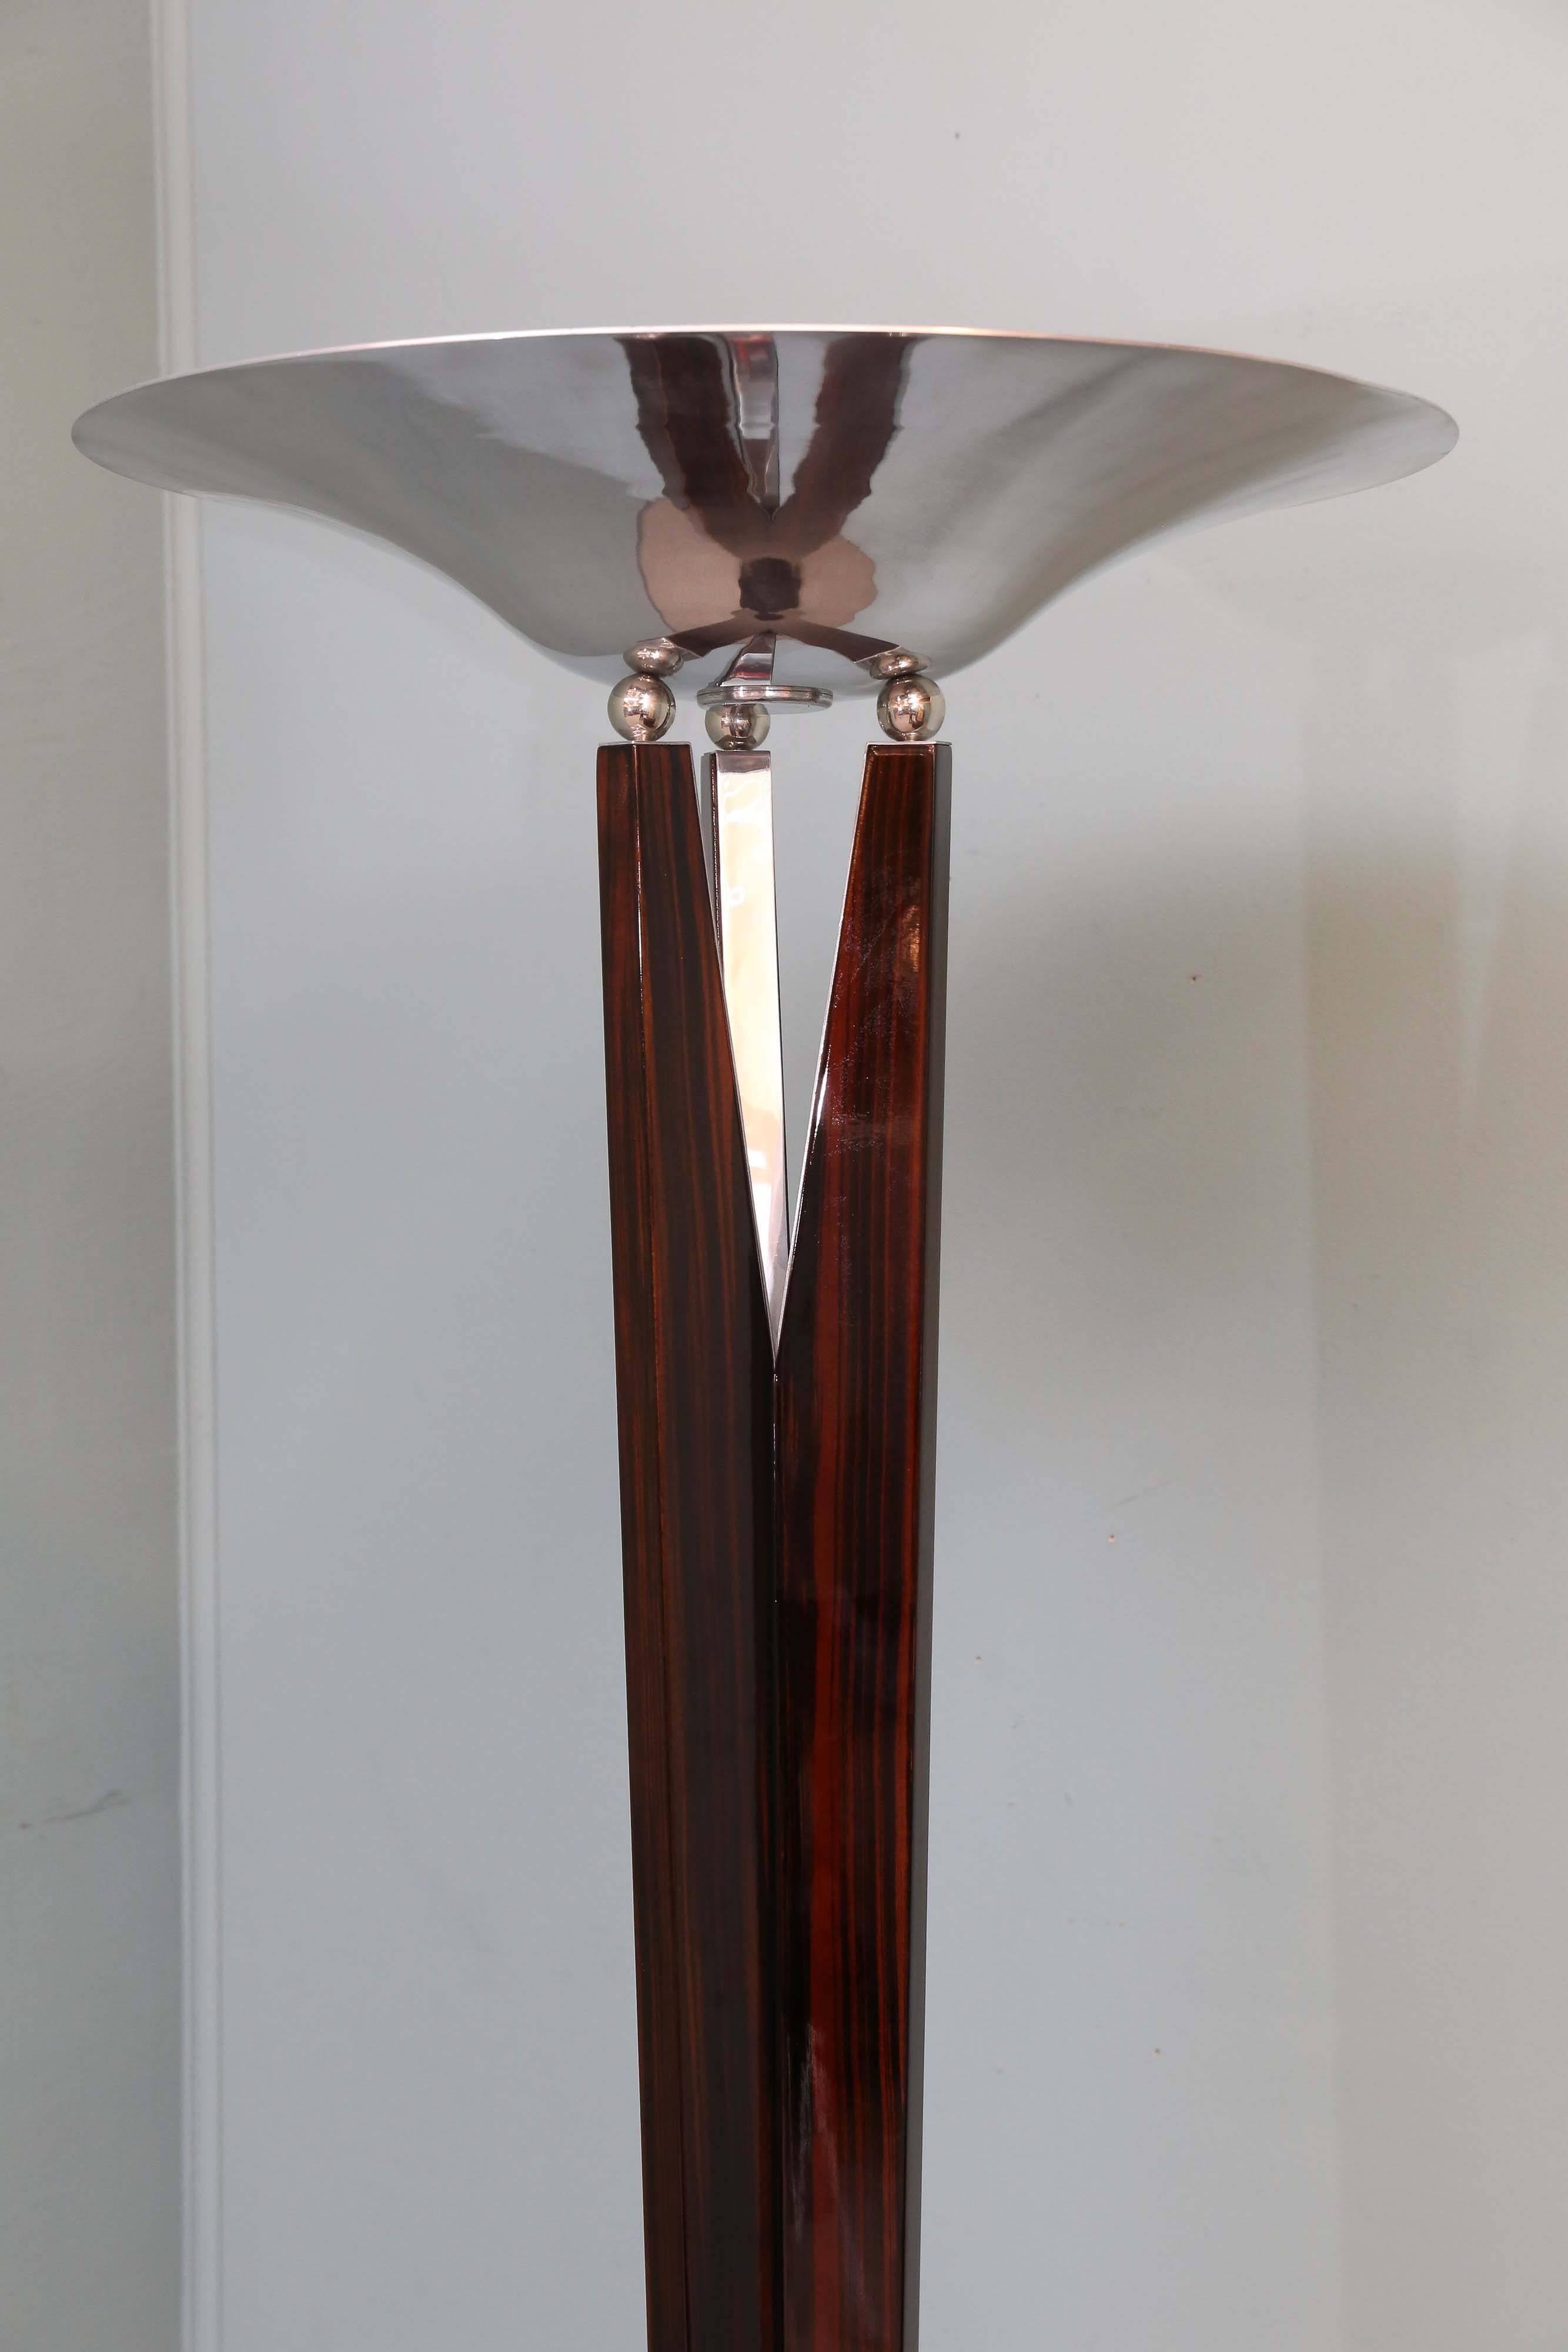 The wooden thick stable base of the lamp supports three rectangular poles that are connected with each other. Right before the funnel shaped chrome lampshade, the poles are distanced from each other and providing better support for the lampshade. On